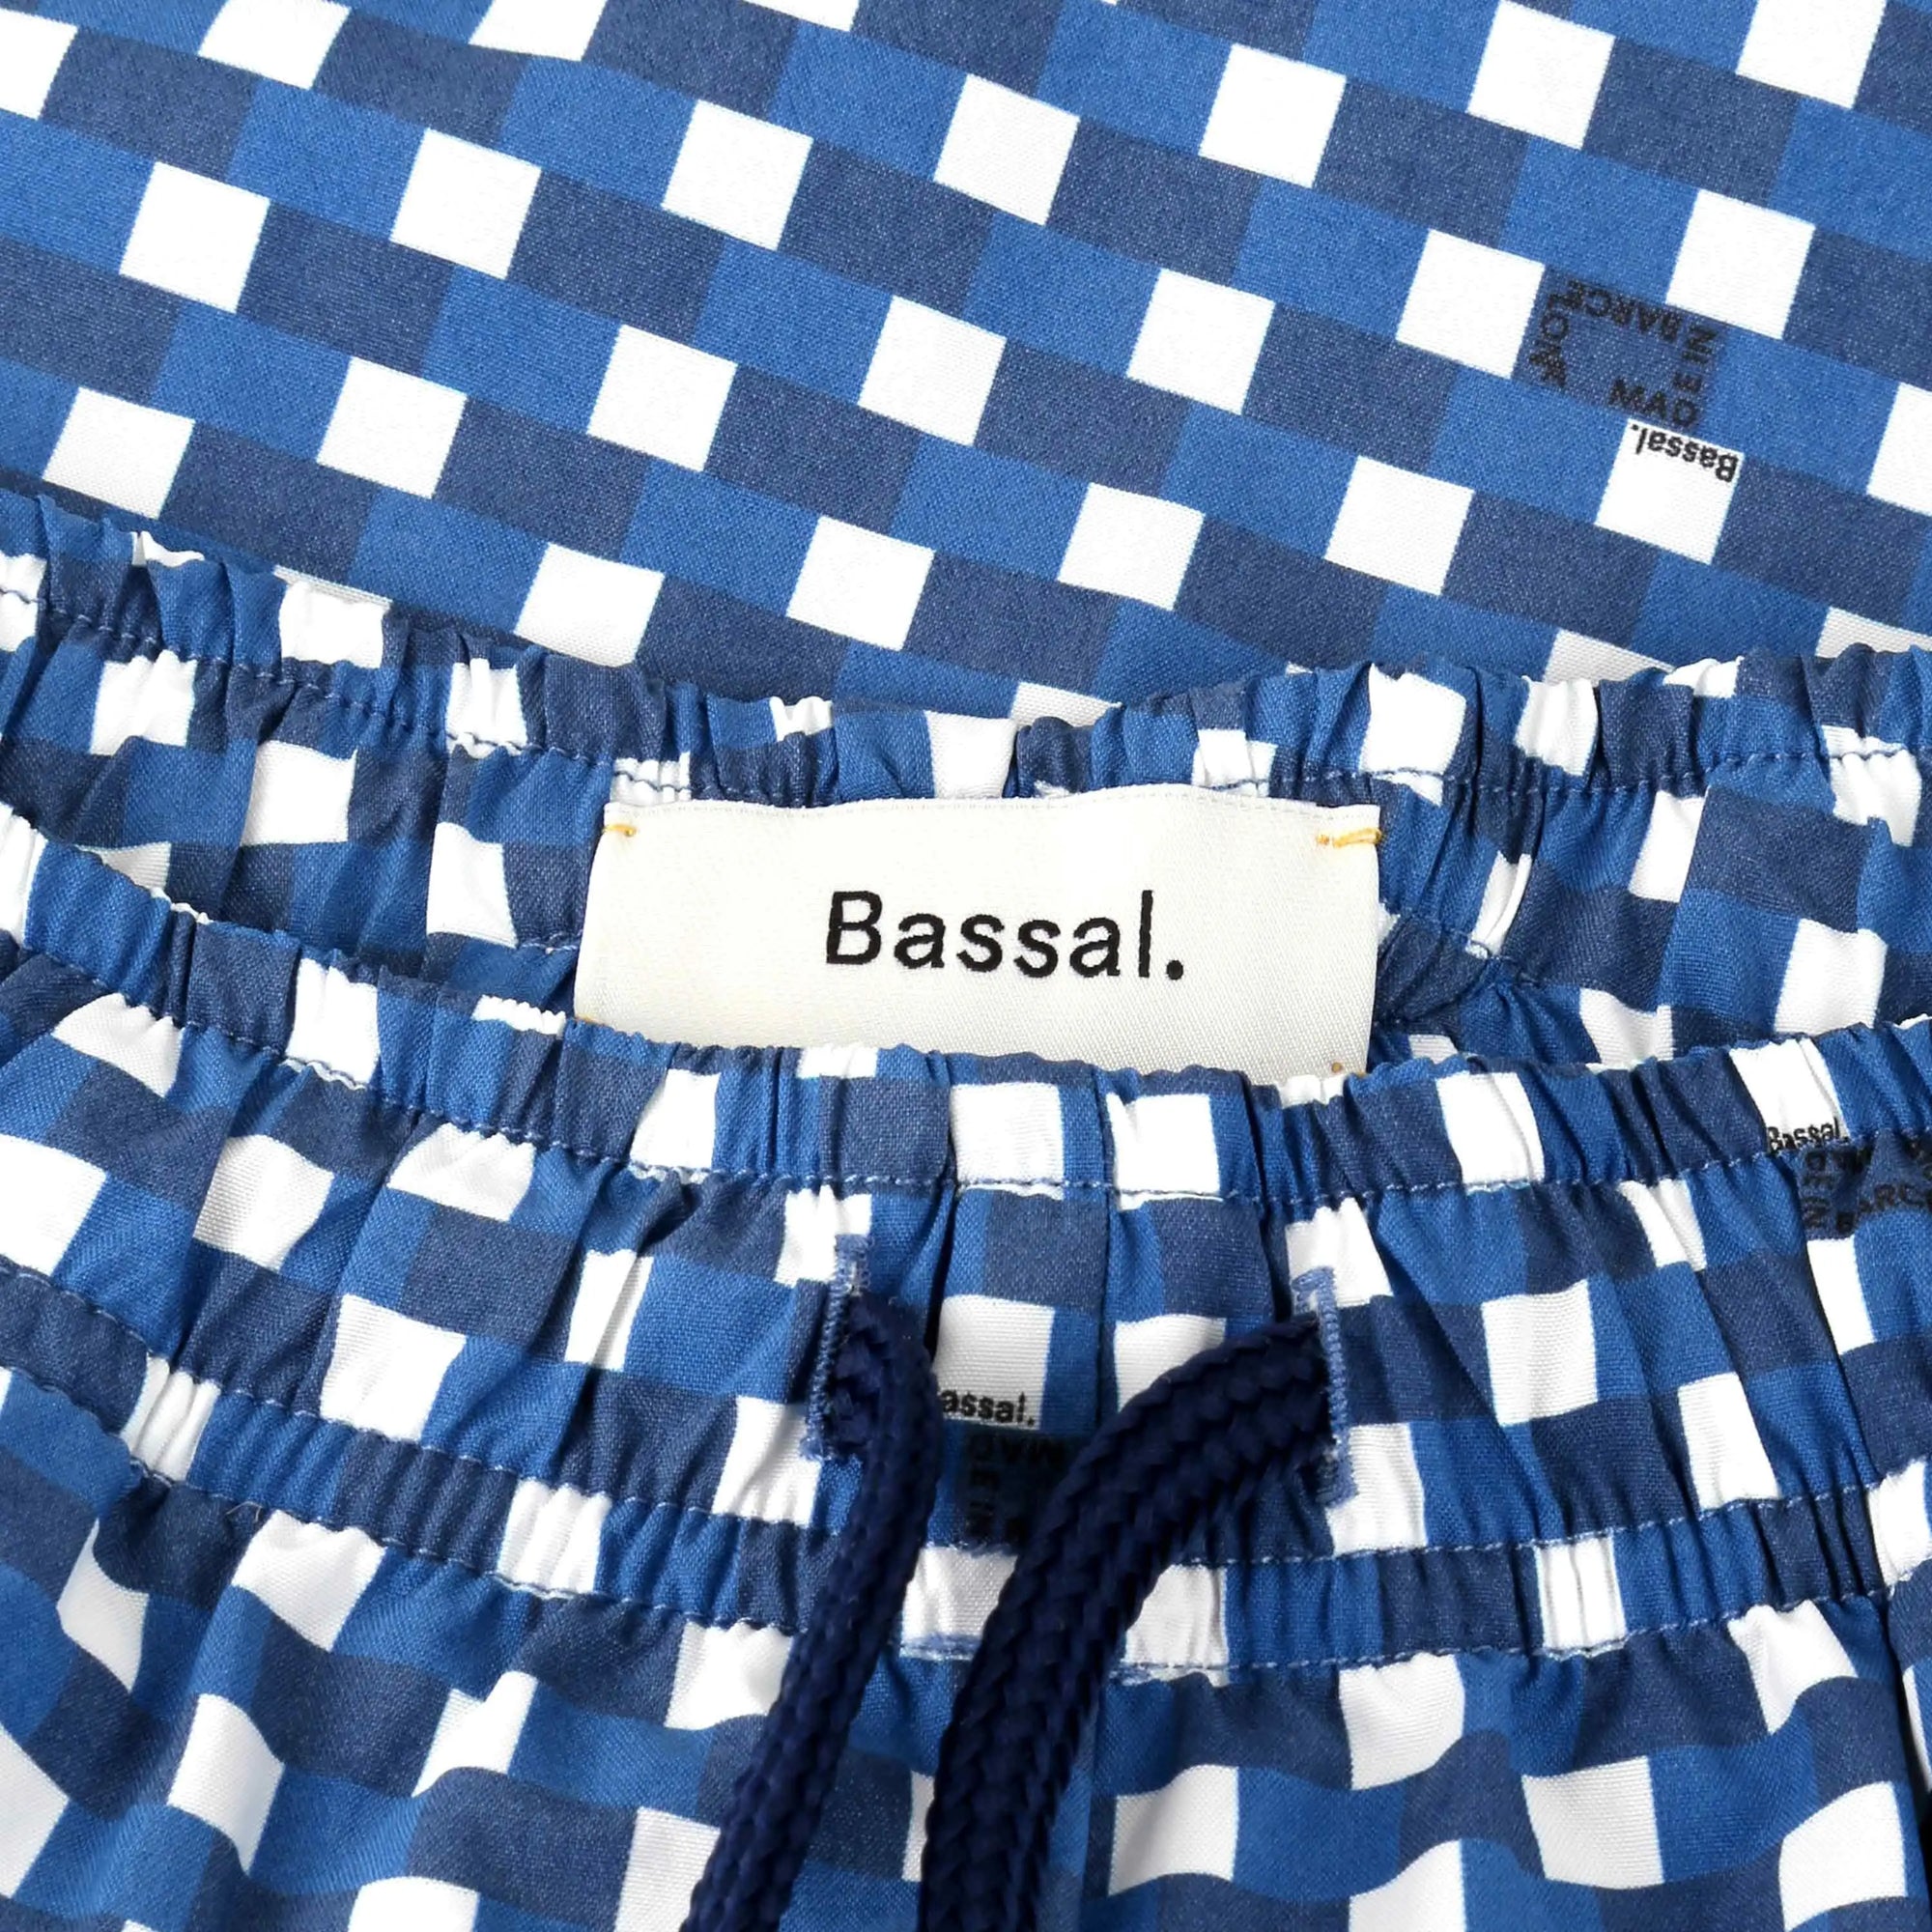 A pair of Paris Blue Swimwear is neatly folded inside an orange box with white edges. Attached to the swimwear are a white tag with the brand name "Bassal." and a card. The box lid, partially visible, also bears the brand name "Bassalstore," likely from their Barcelona store.